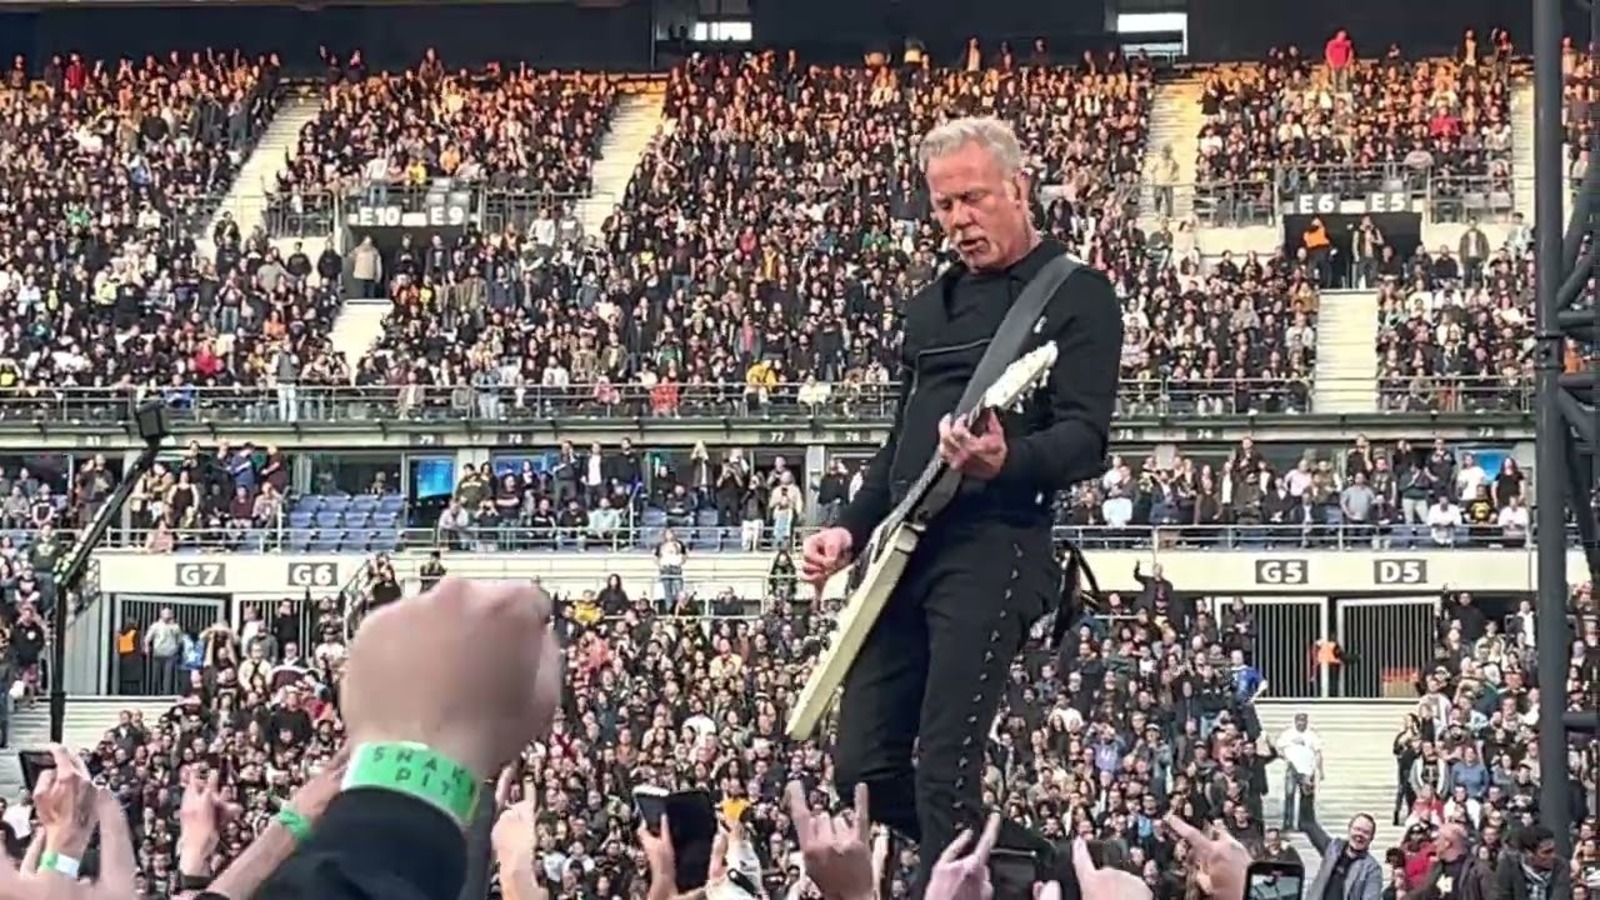 METALLICA in Paris Night 1 See setlist and videos from M72 Tour Revolver